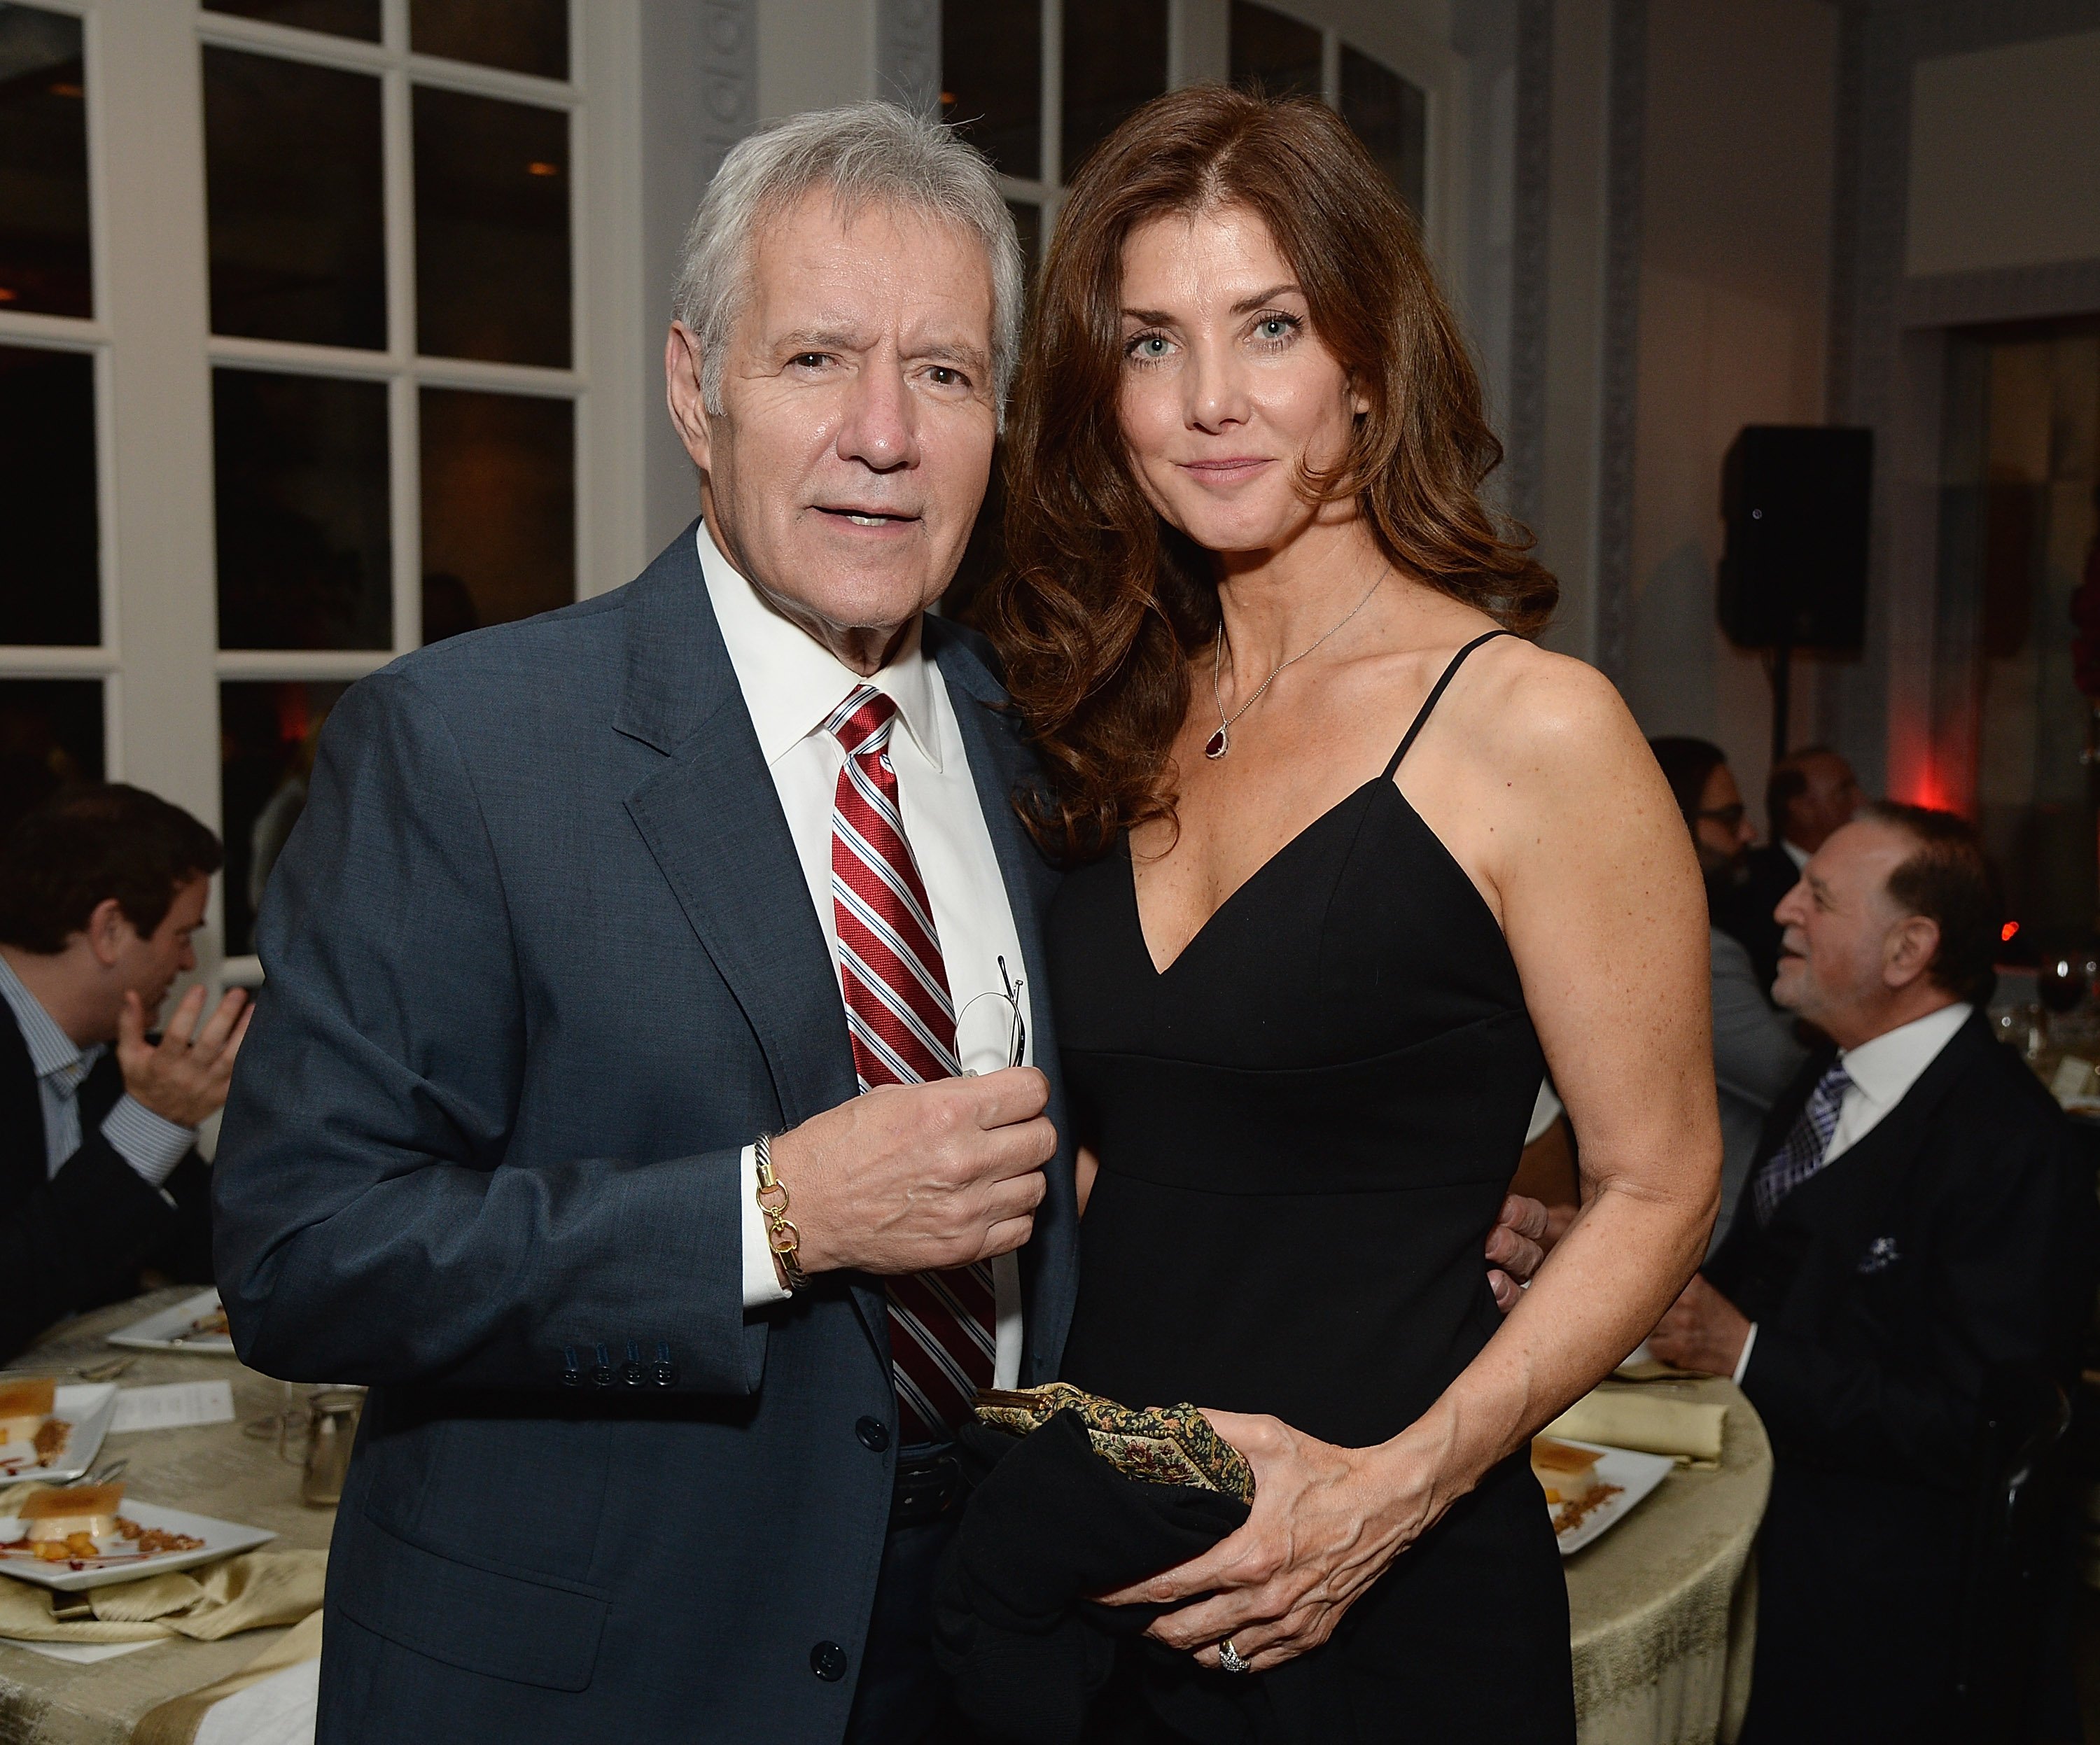 Alex Trebek and Jean Currivan Trebek attend the dinner tribute to Sophia Loren during the AFI FEST on November 12, 2014. | Photo: Getty Images.